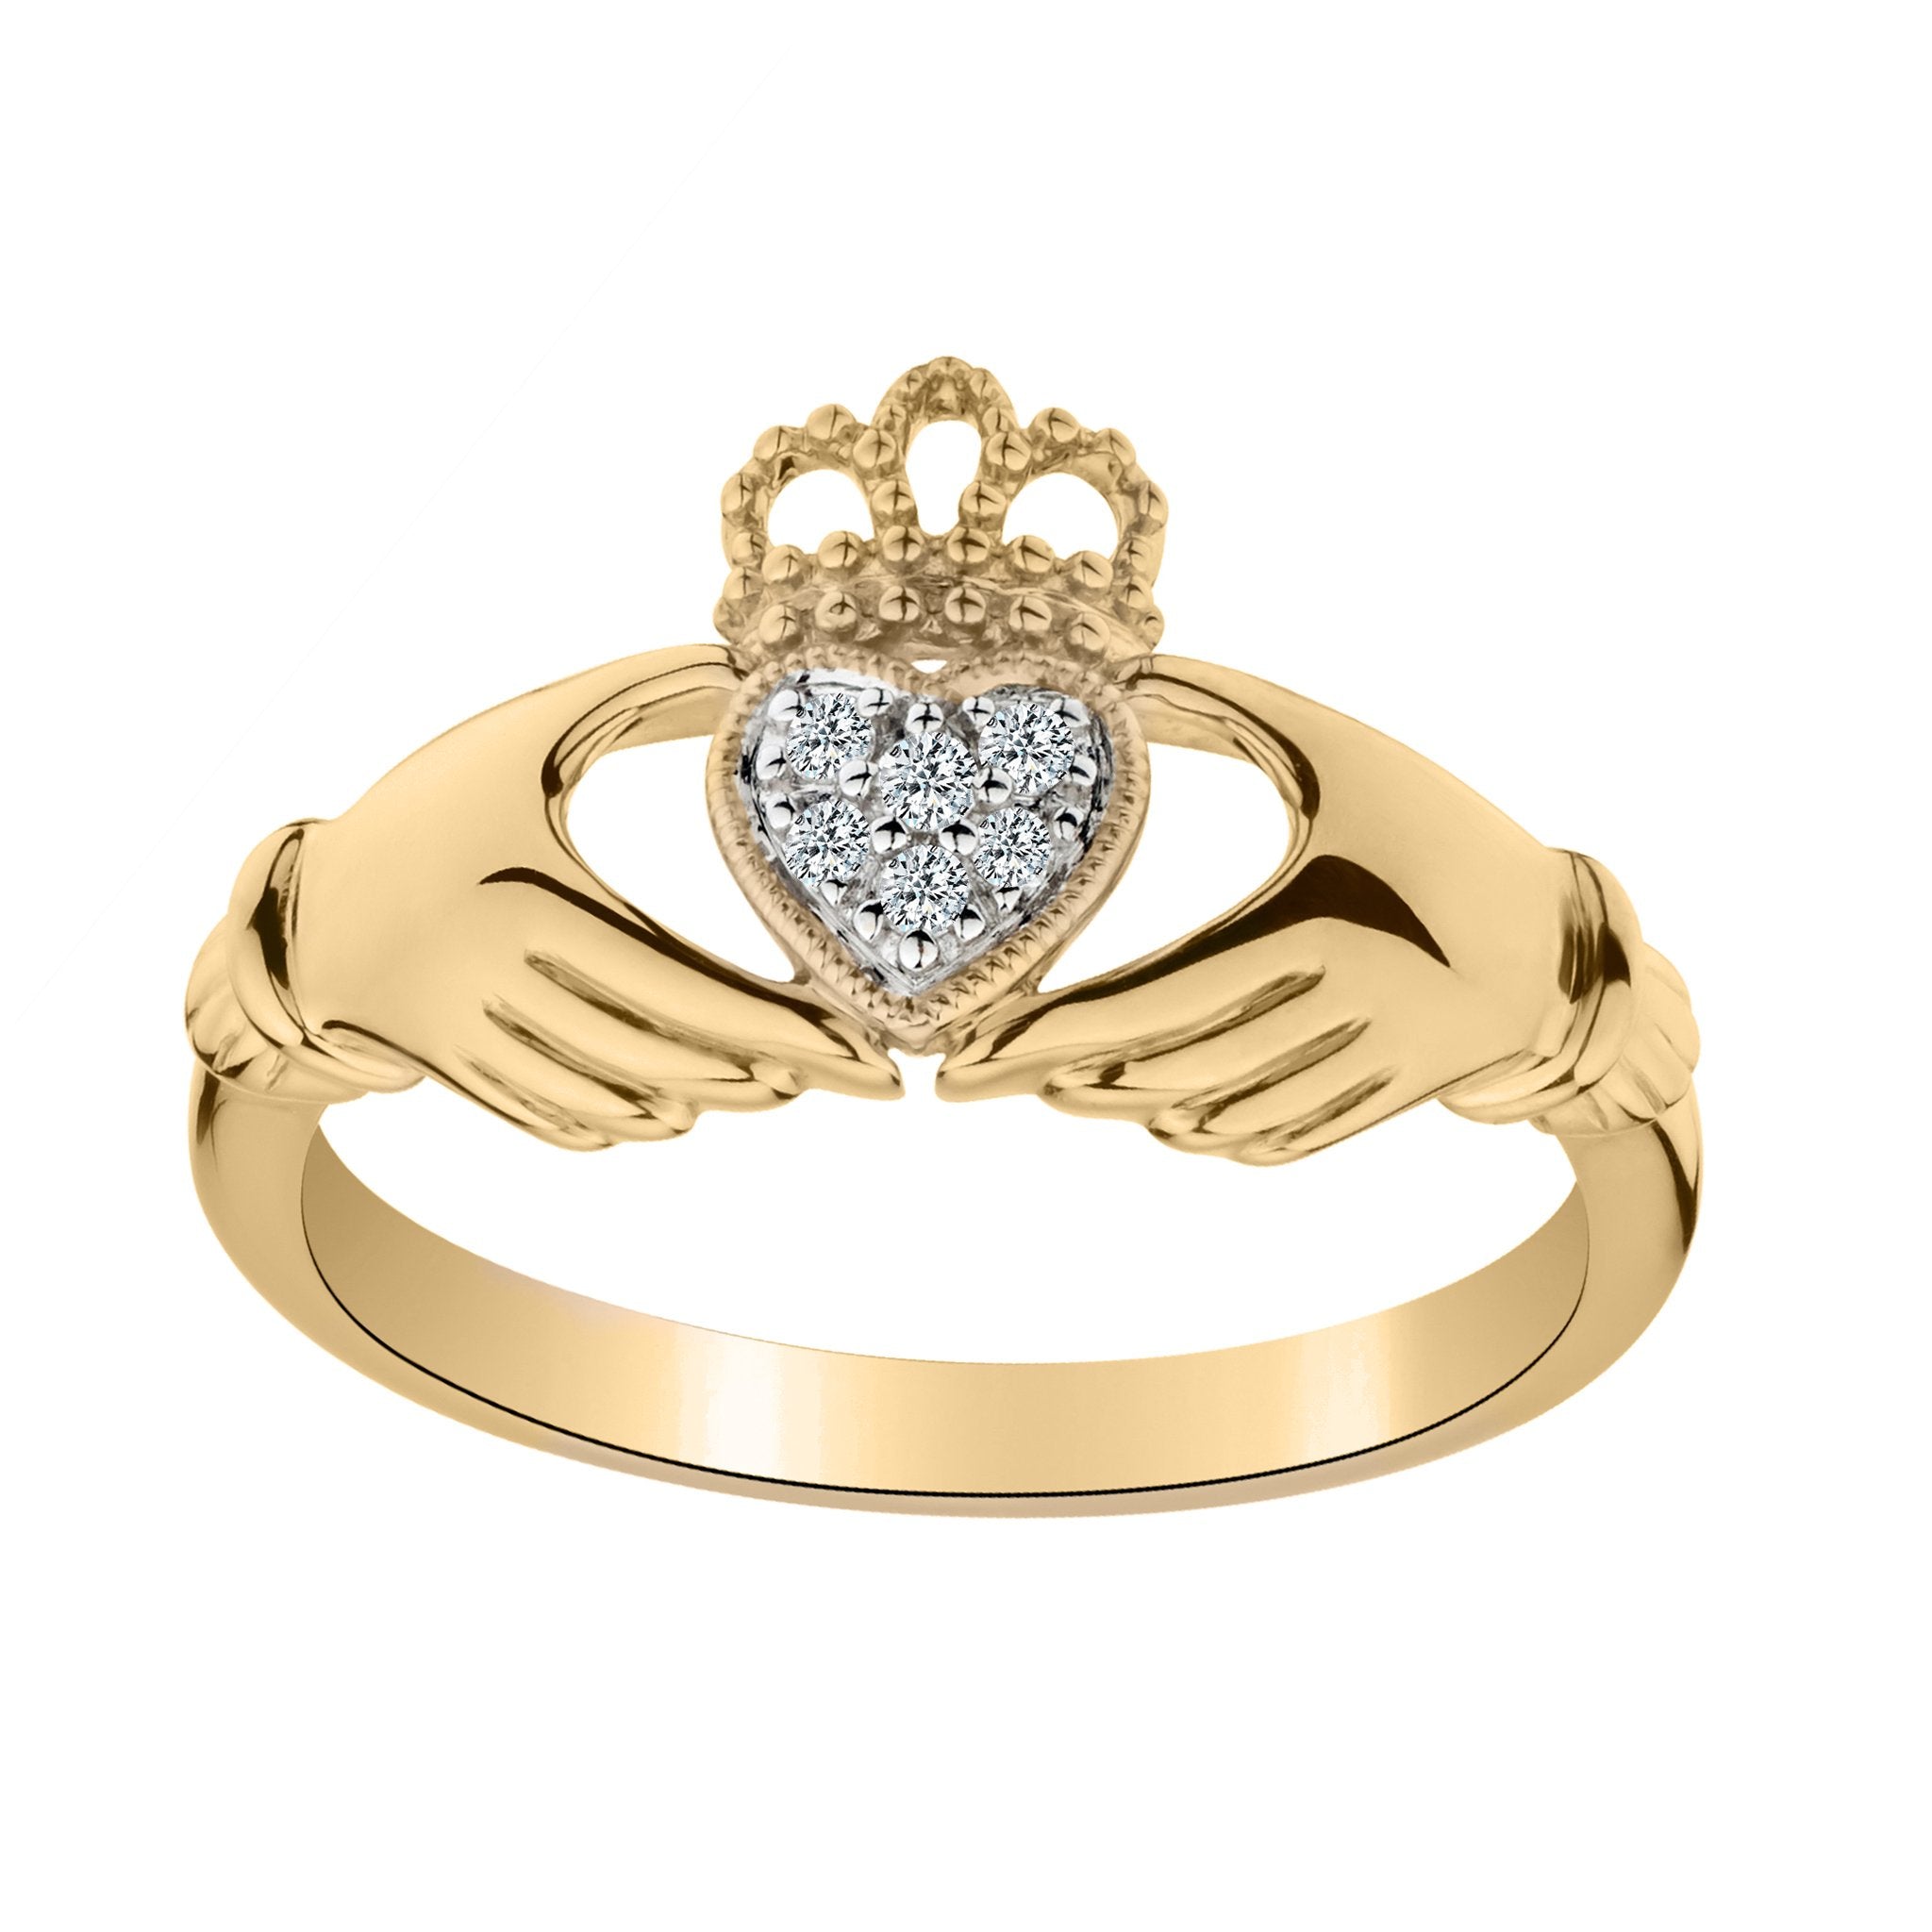 .05 CARAT DIAMOND "CLADDAGH" RING, 10kt YELLOW GOLD. Fashion Rings - Griffin Jewellery Designs